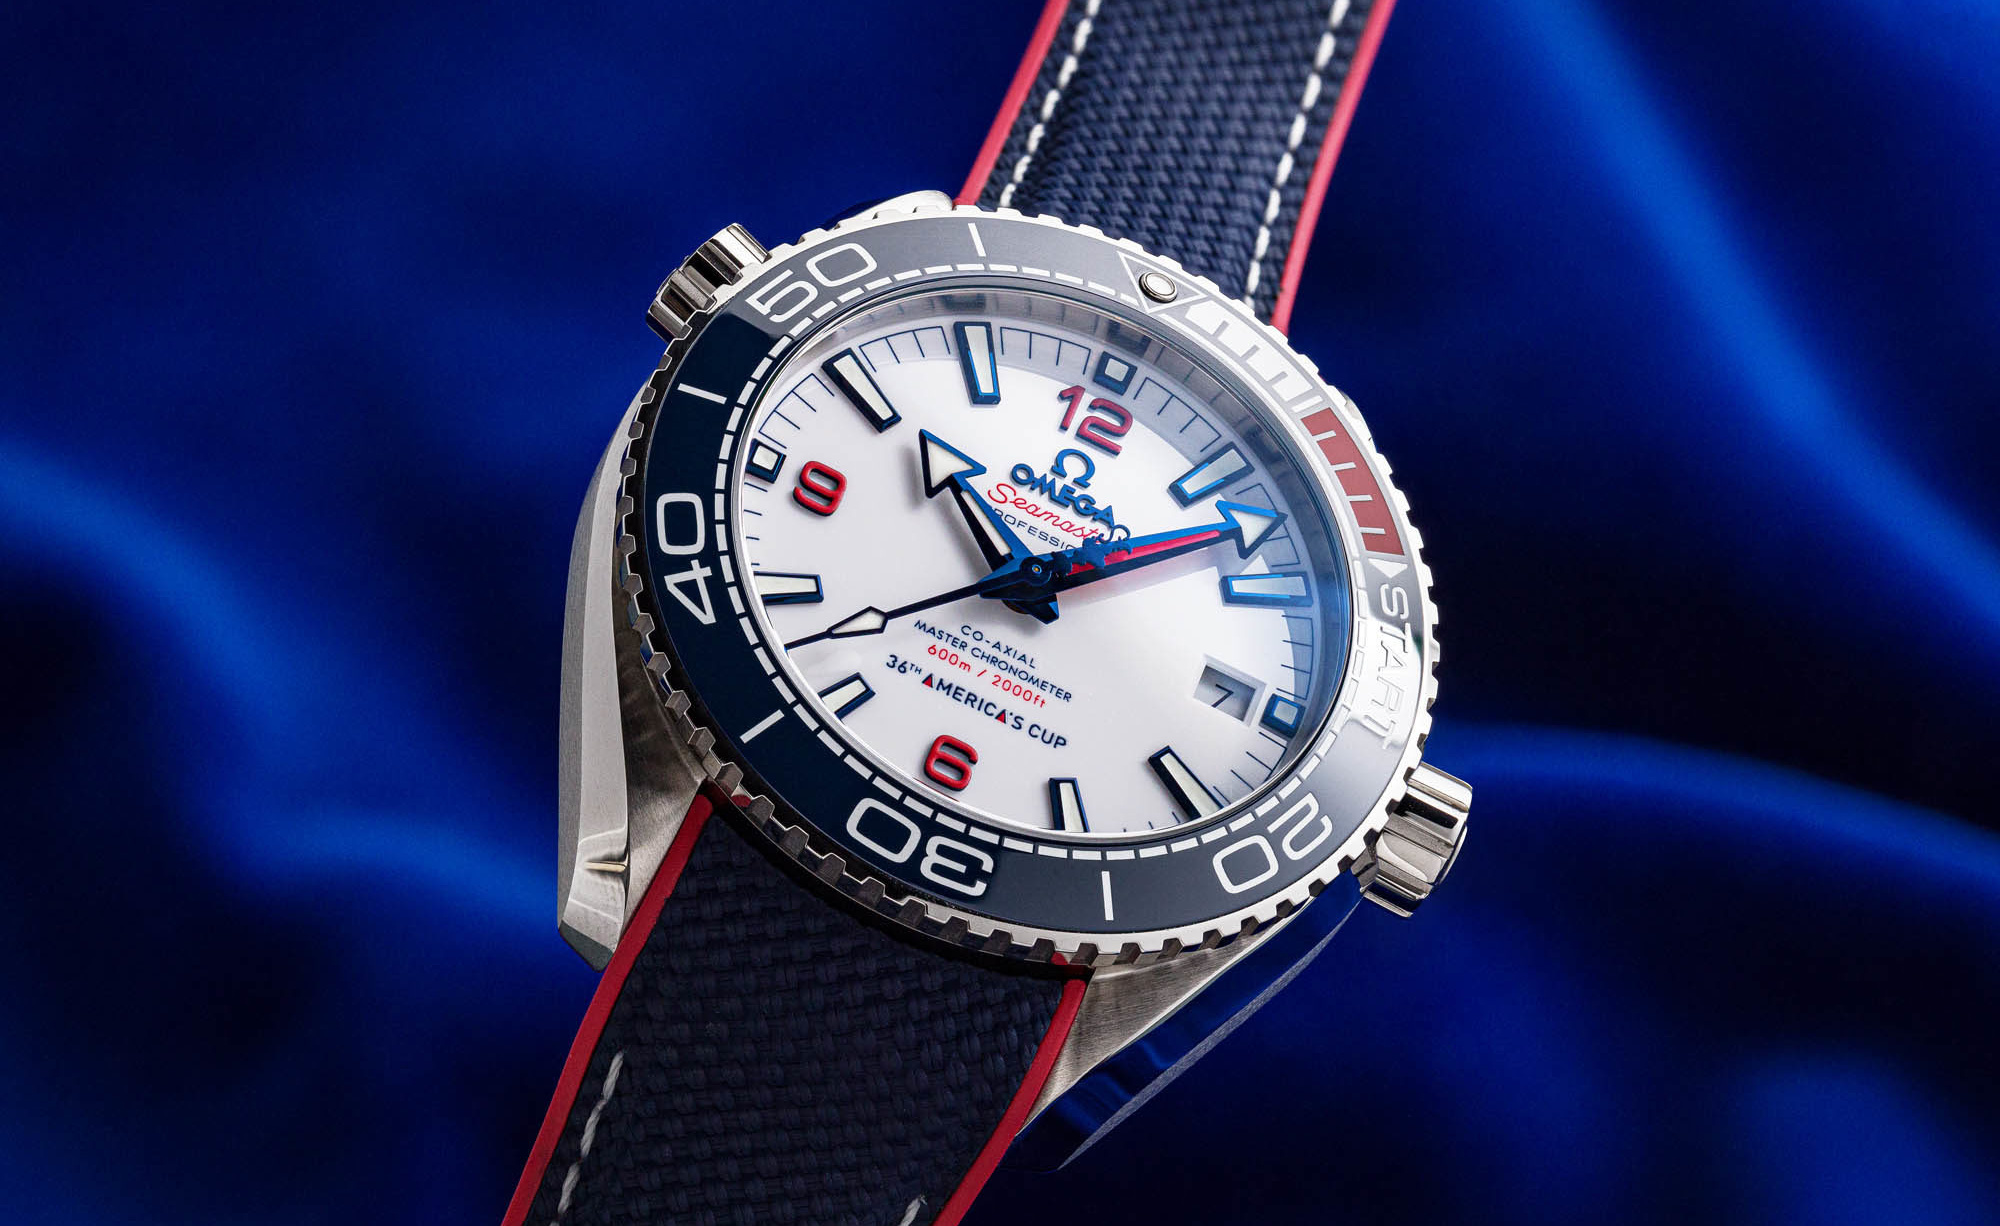 Hands-On With The Omega Seamaster Planet Ocean For The 36th America's Cup